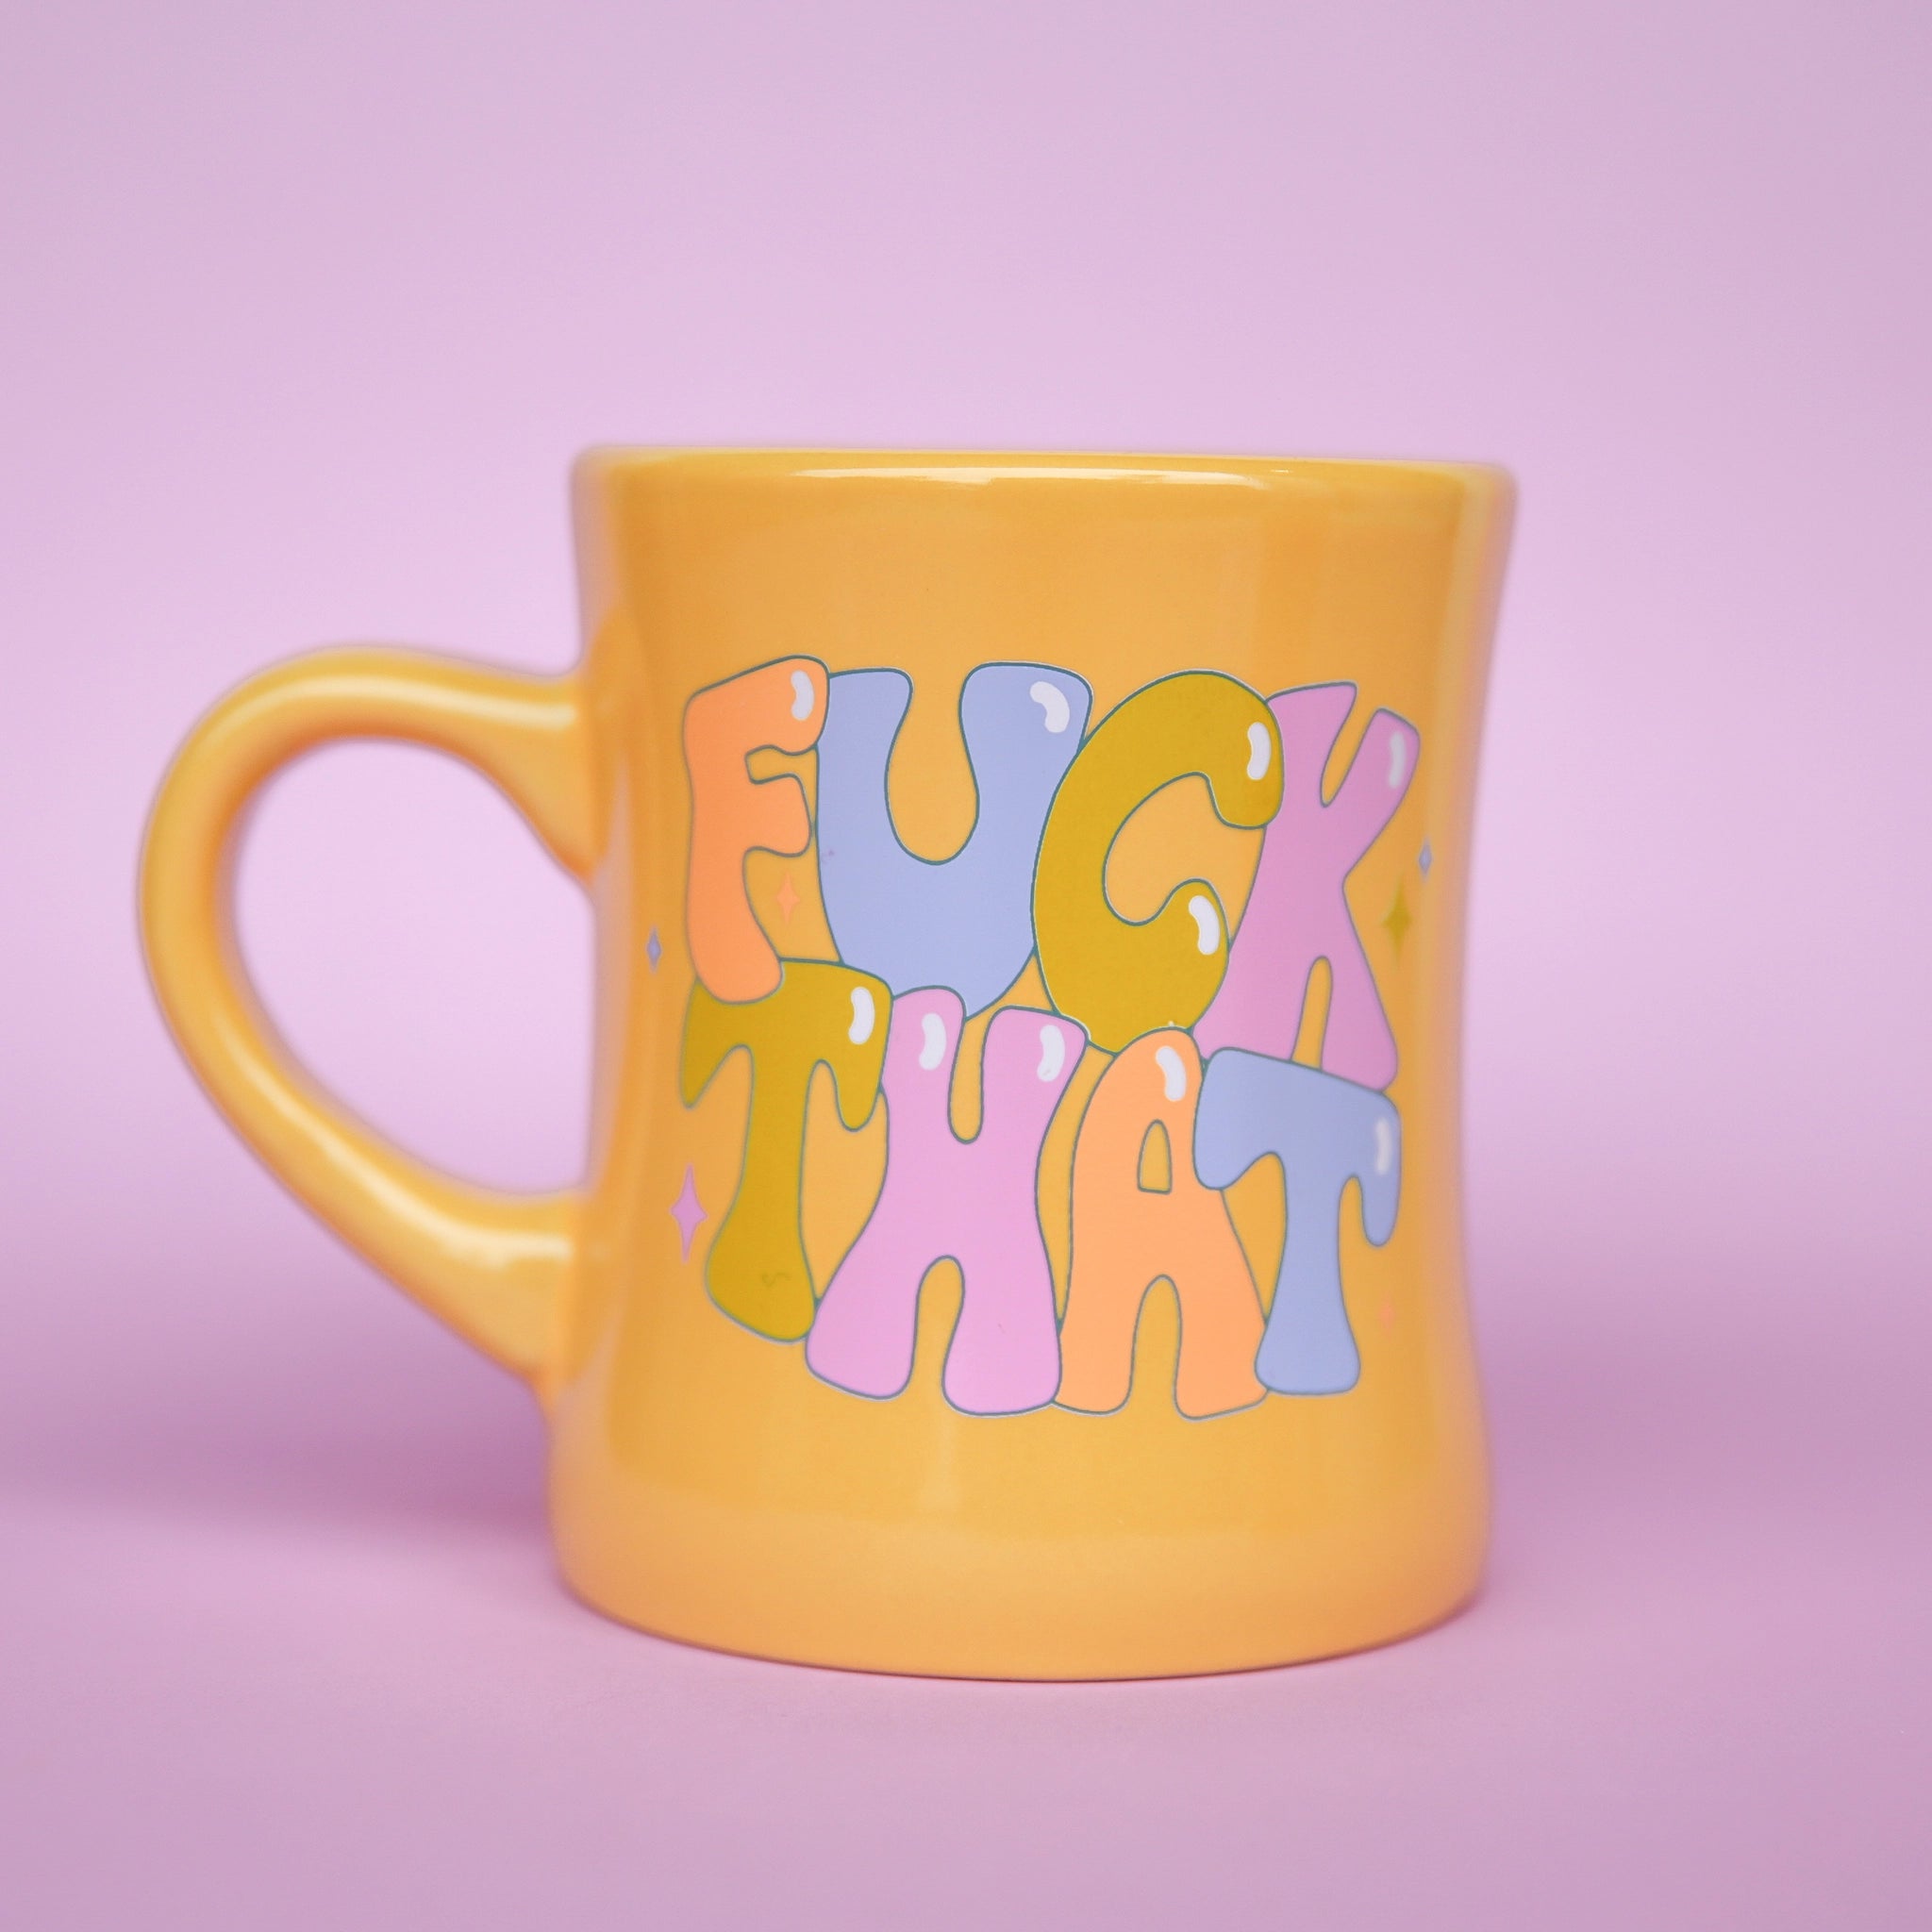 On a purple background is a yellow diner style mug that reads, "Fuck That" in multi colored text.